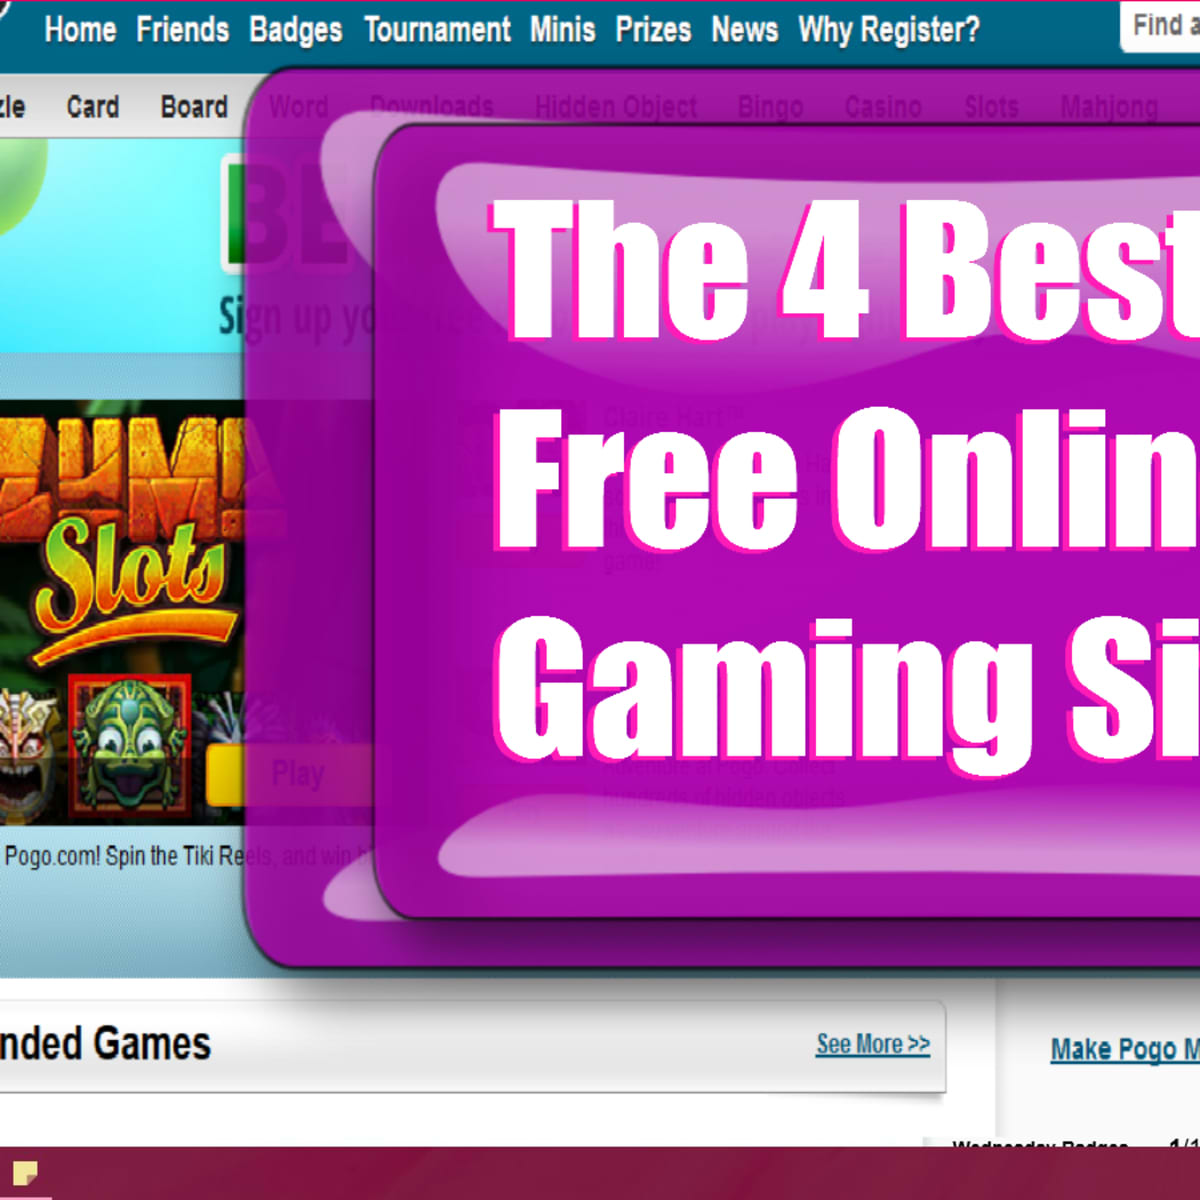 The 4 Best Free Online Gaming Sites